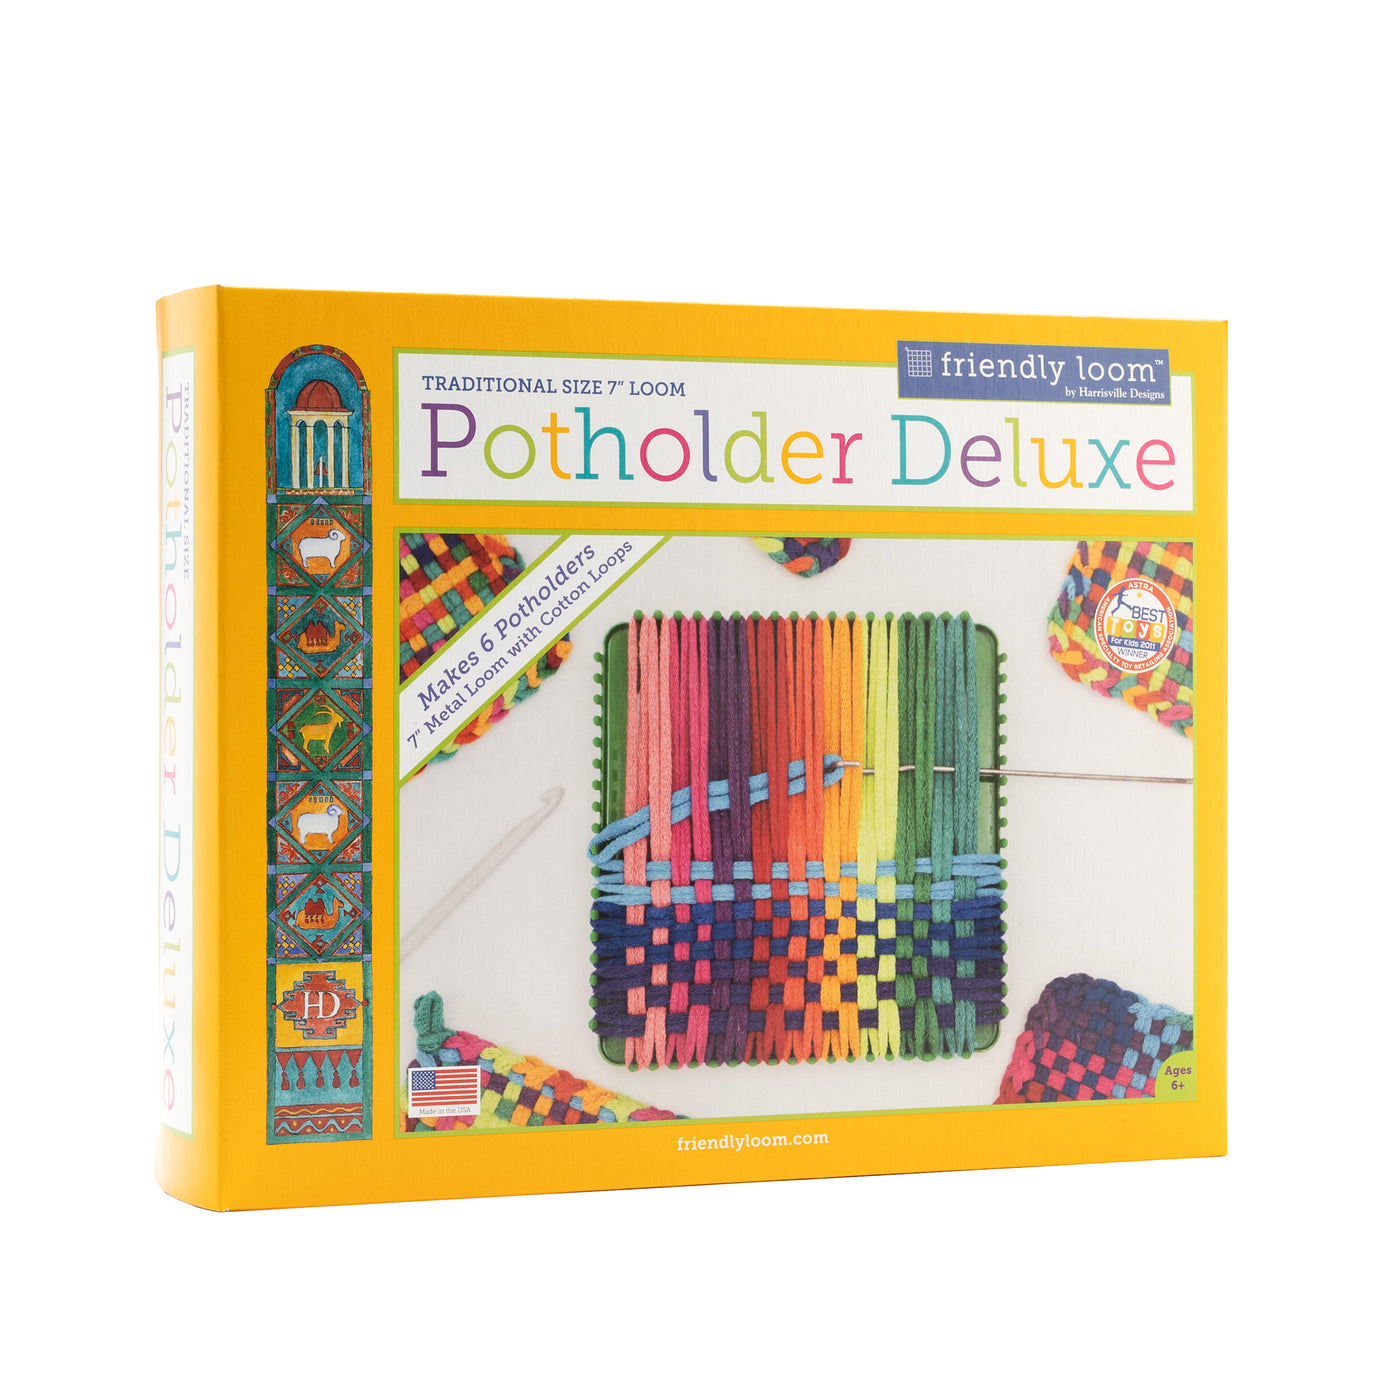 7 Potholder Loom DELUXE (Traditional Size) – Harrisville Designs